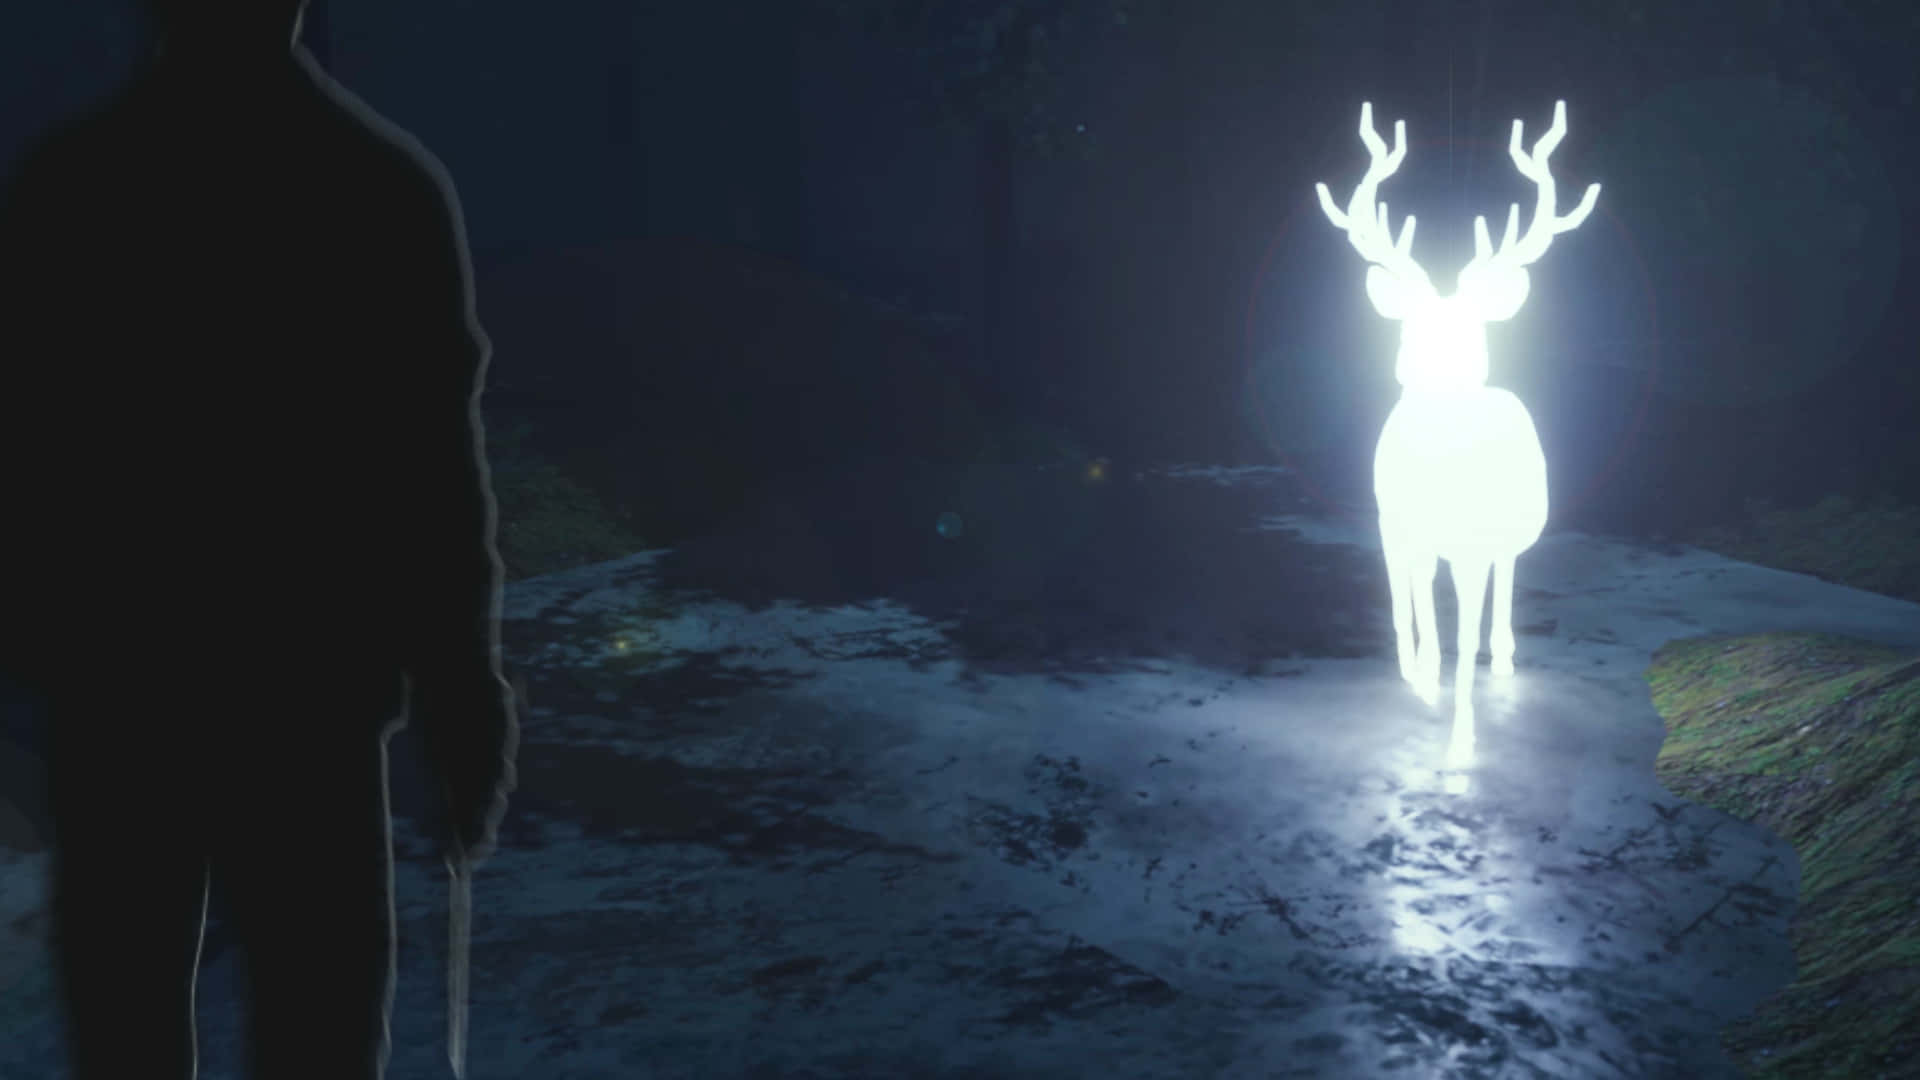 A majestic stag Patronus glowing in a dark forest Wallpaper